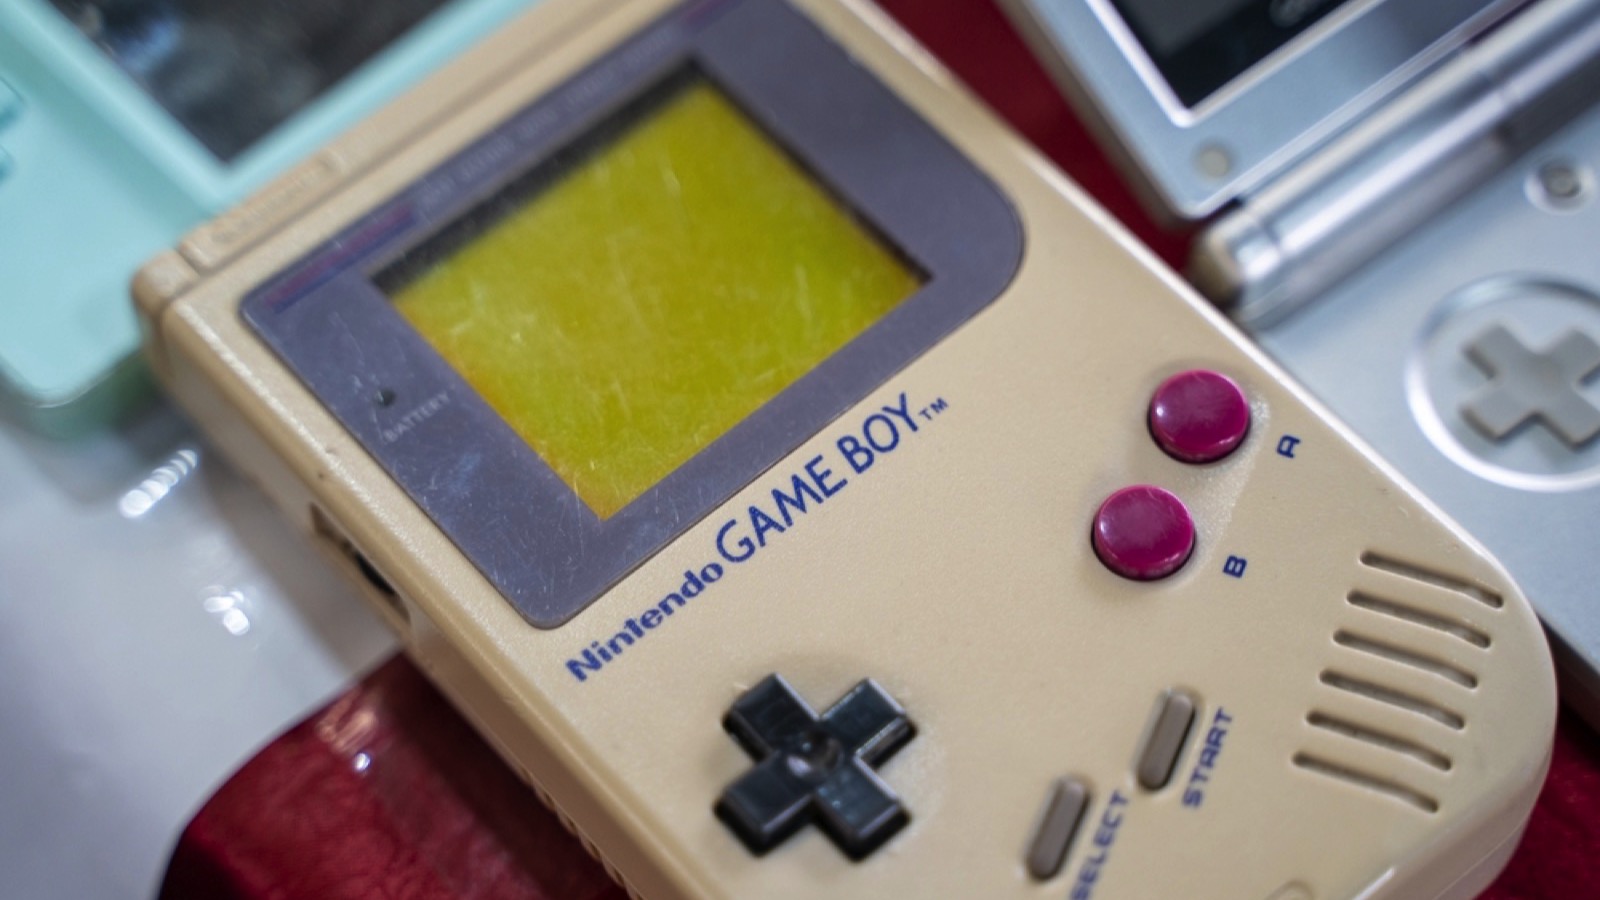 The Gameboy